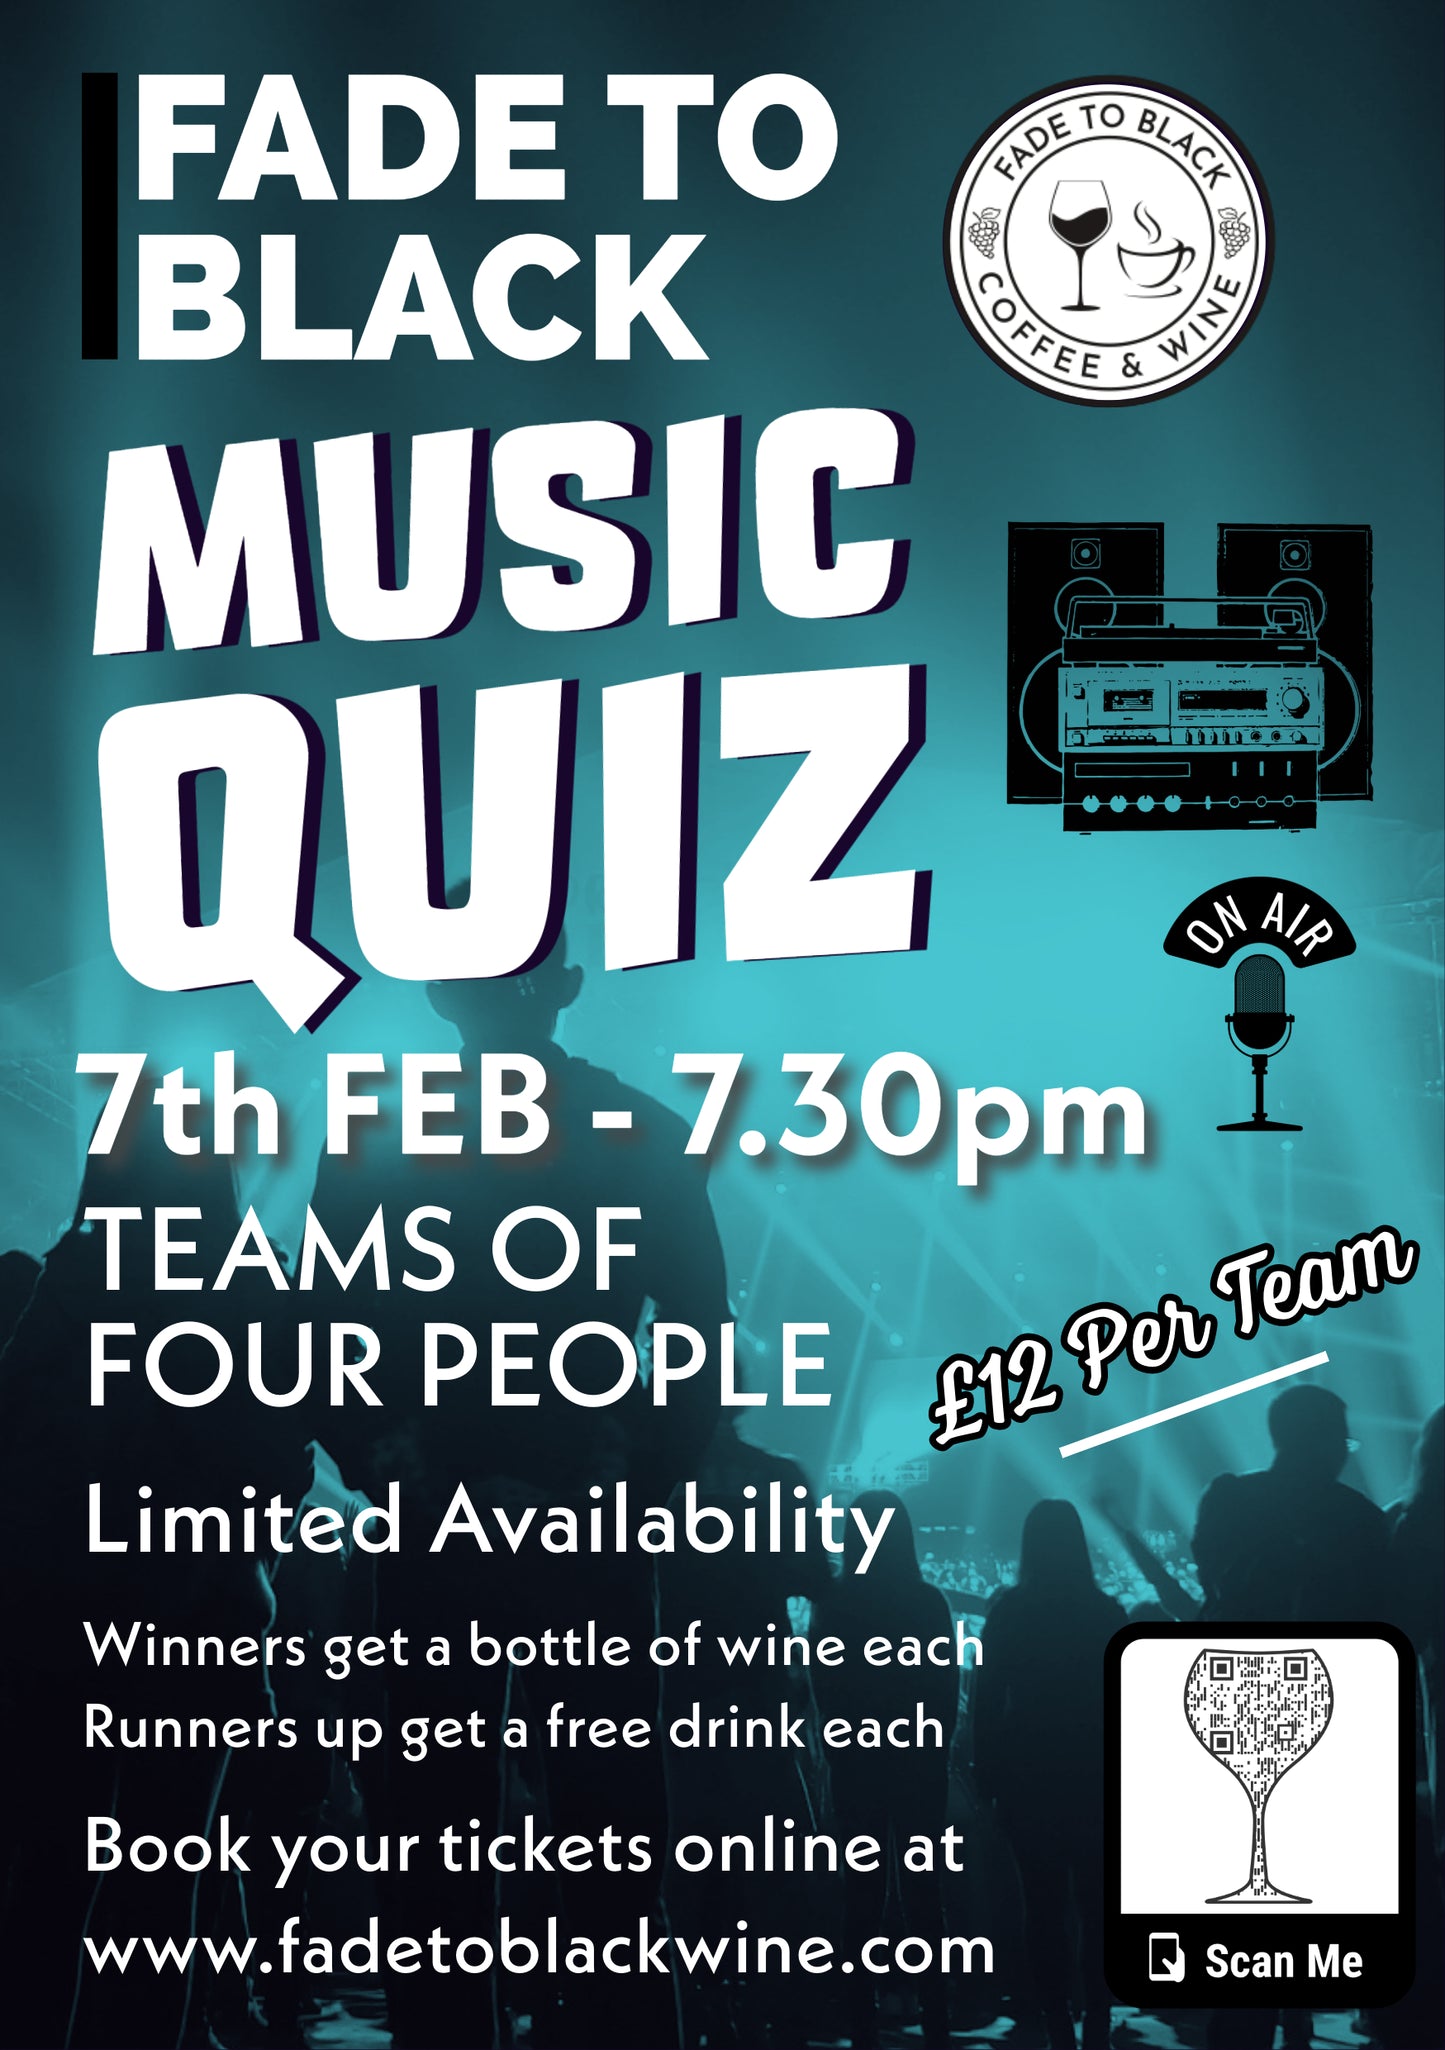 Music Quiz - Wednesday 7th February - Teams of 4